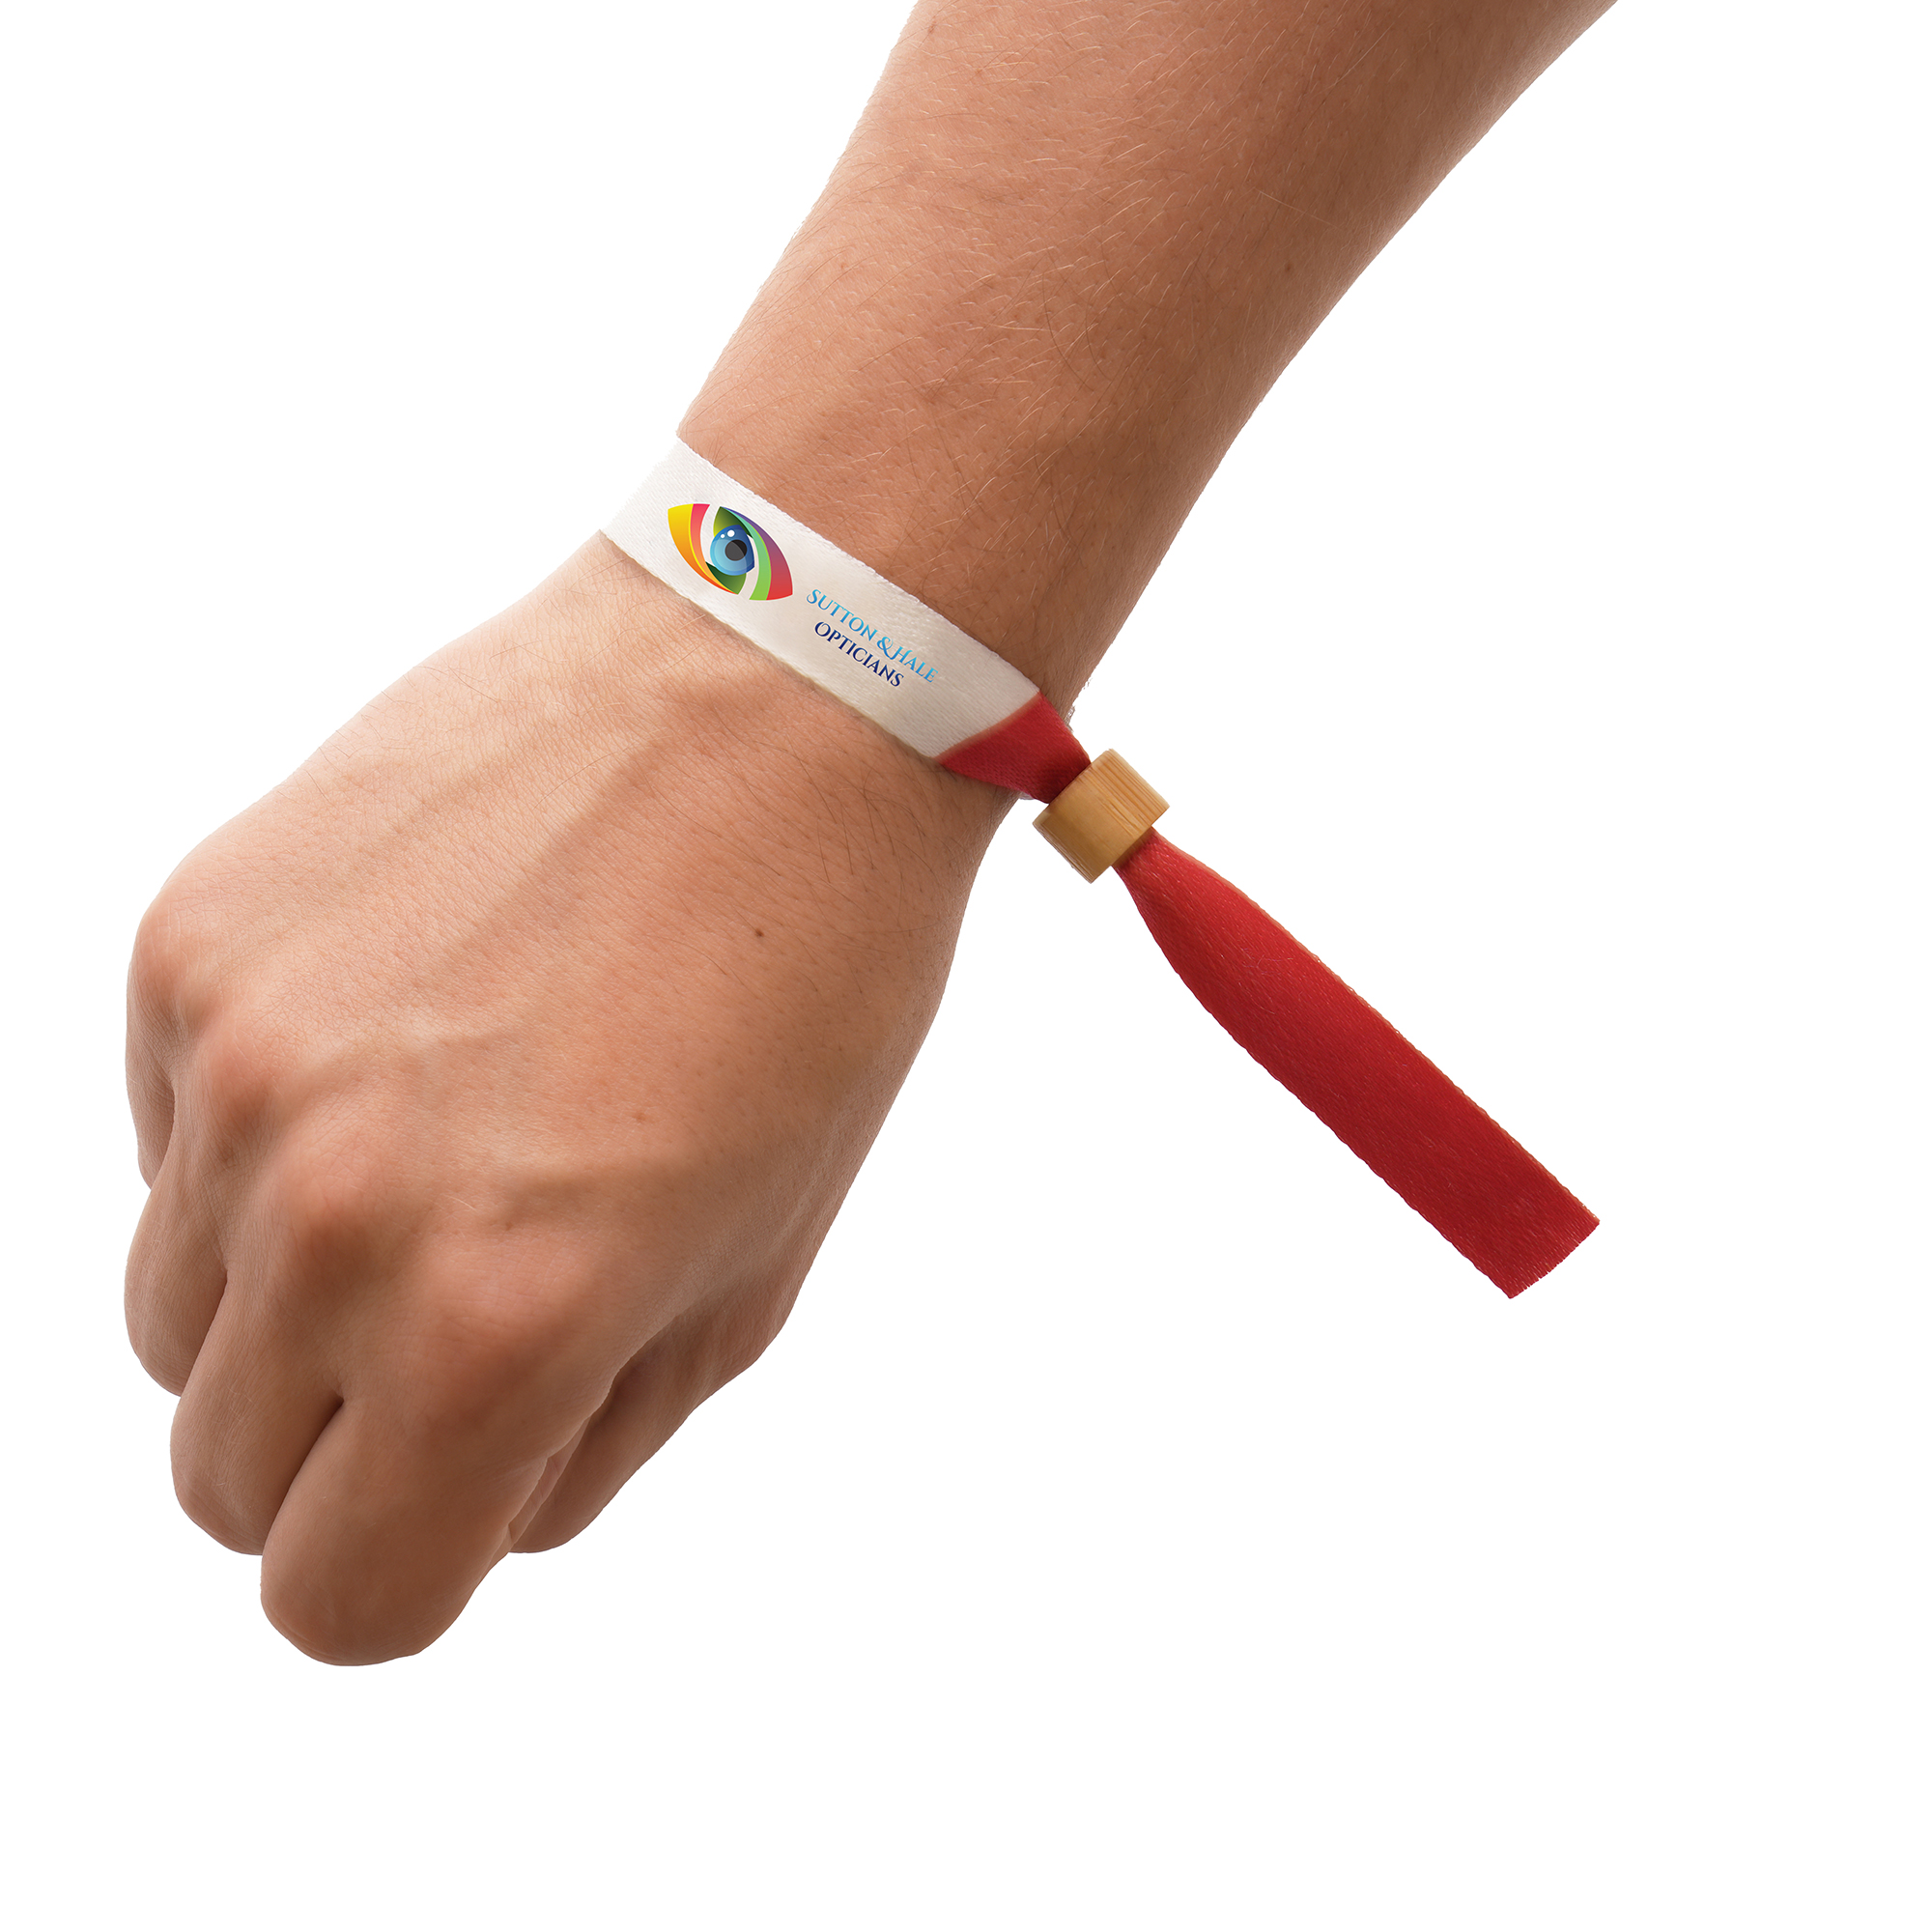 Made from eco-friendly RPET material, this is the ideal wristband to show off your branding at your next event. Adjustable bamboo bead that can be tightened to fit perfectly.